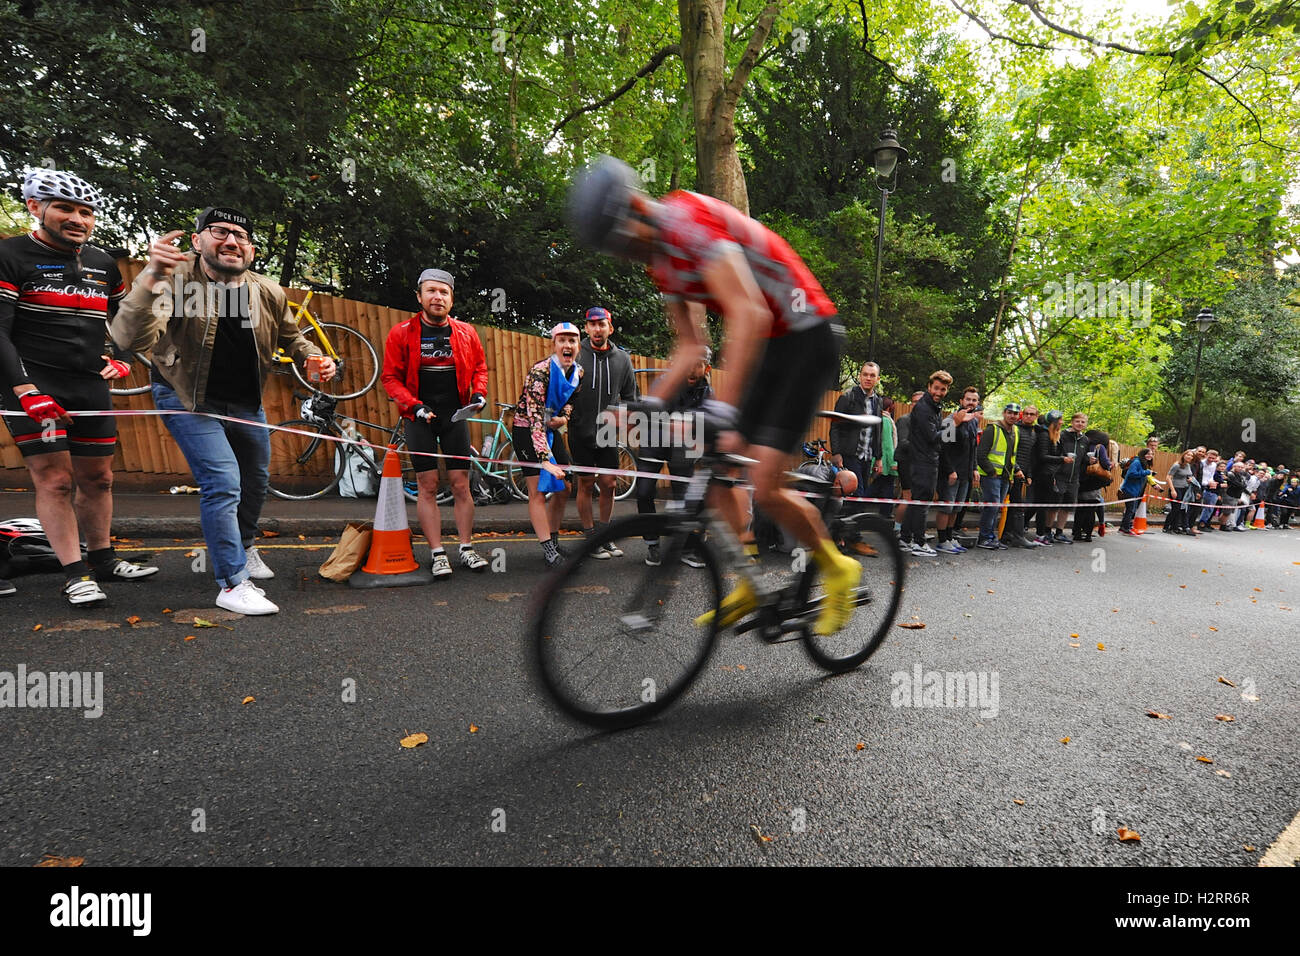 London, UK. 01st Oct, 2016. Crowds at the Rollapaluza Urban Hill Climb competition cheering a rider as he tackles the steepest section of the course.  The event took place on Swain’s Lane, arguably the most famous and notoriously challenging climb in London. . Credit:  Michael Preston/Alamy Live News Stock Photo